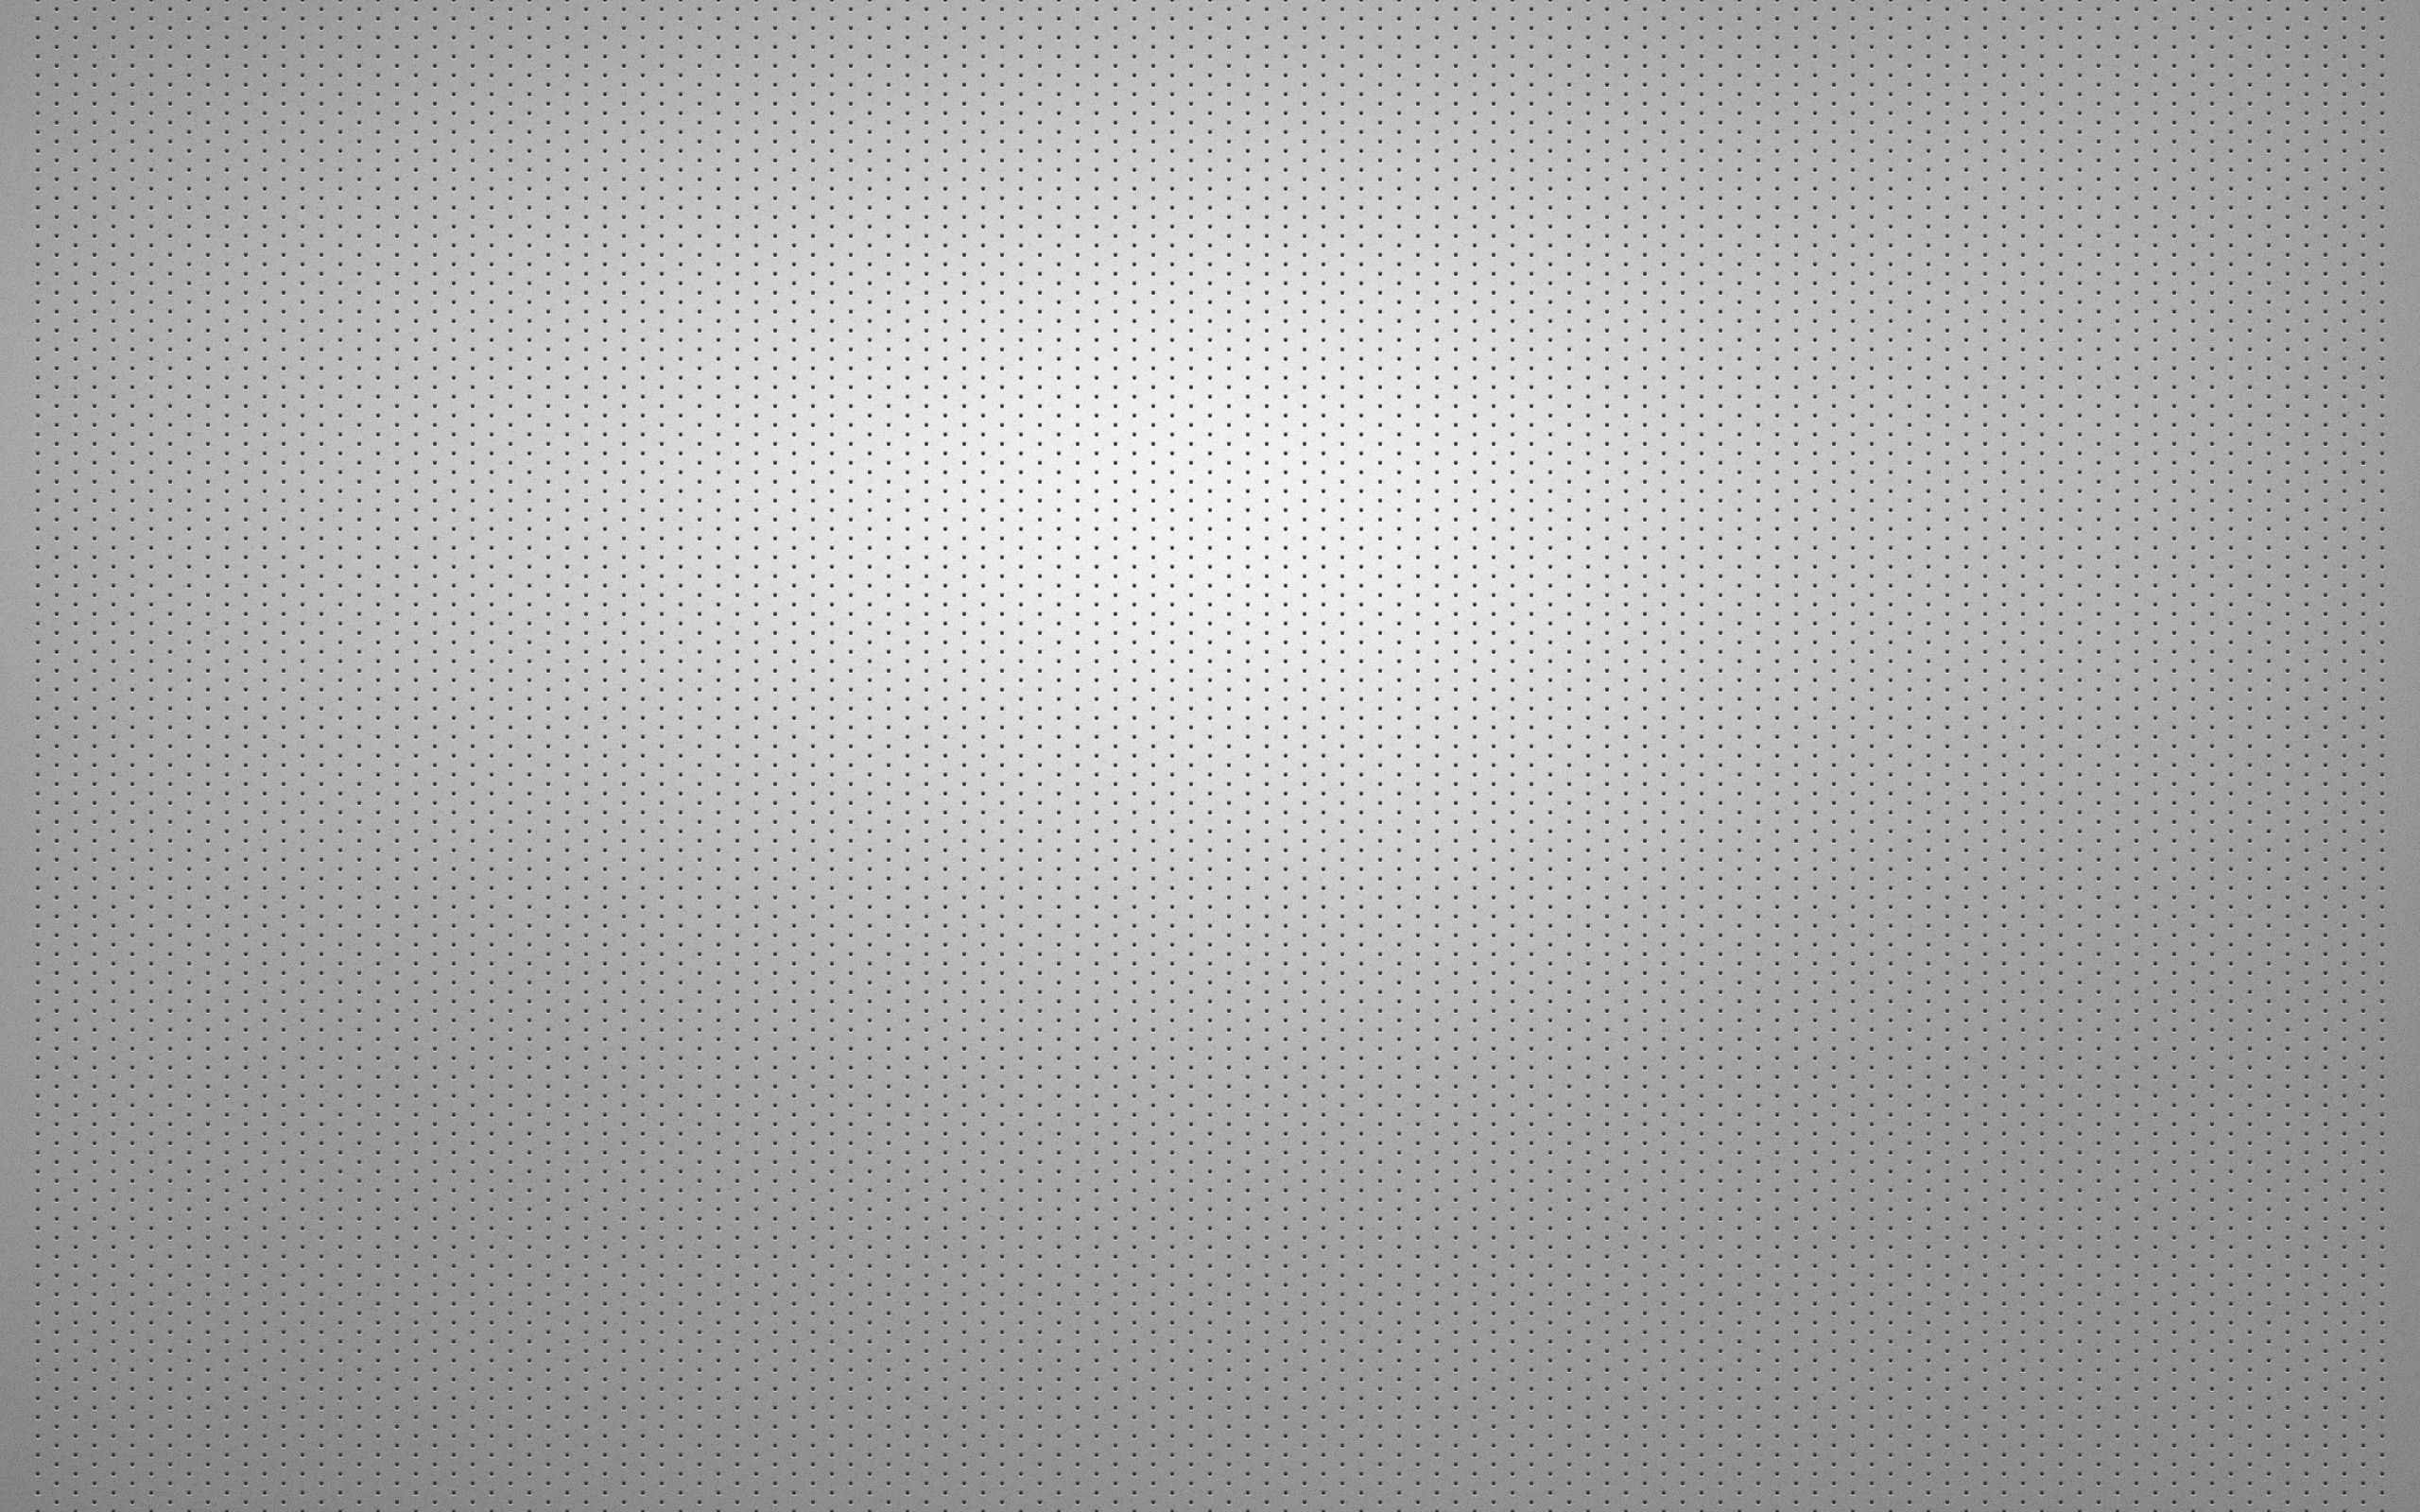 texture, silver, background, grid, points, point, textures Full HD